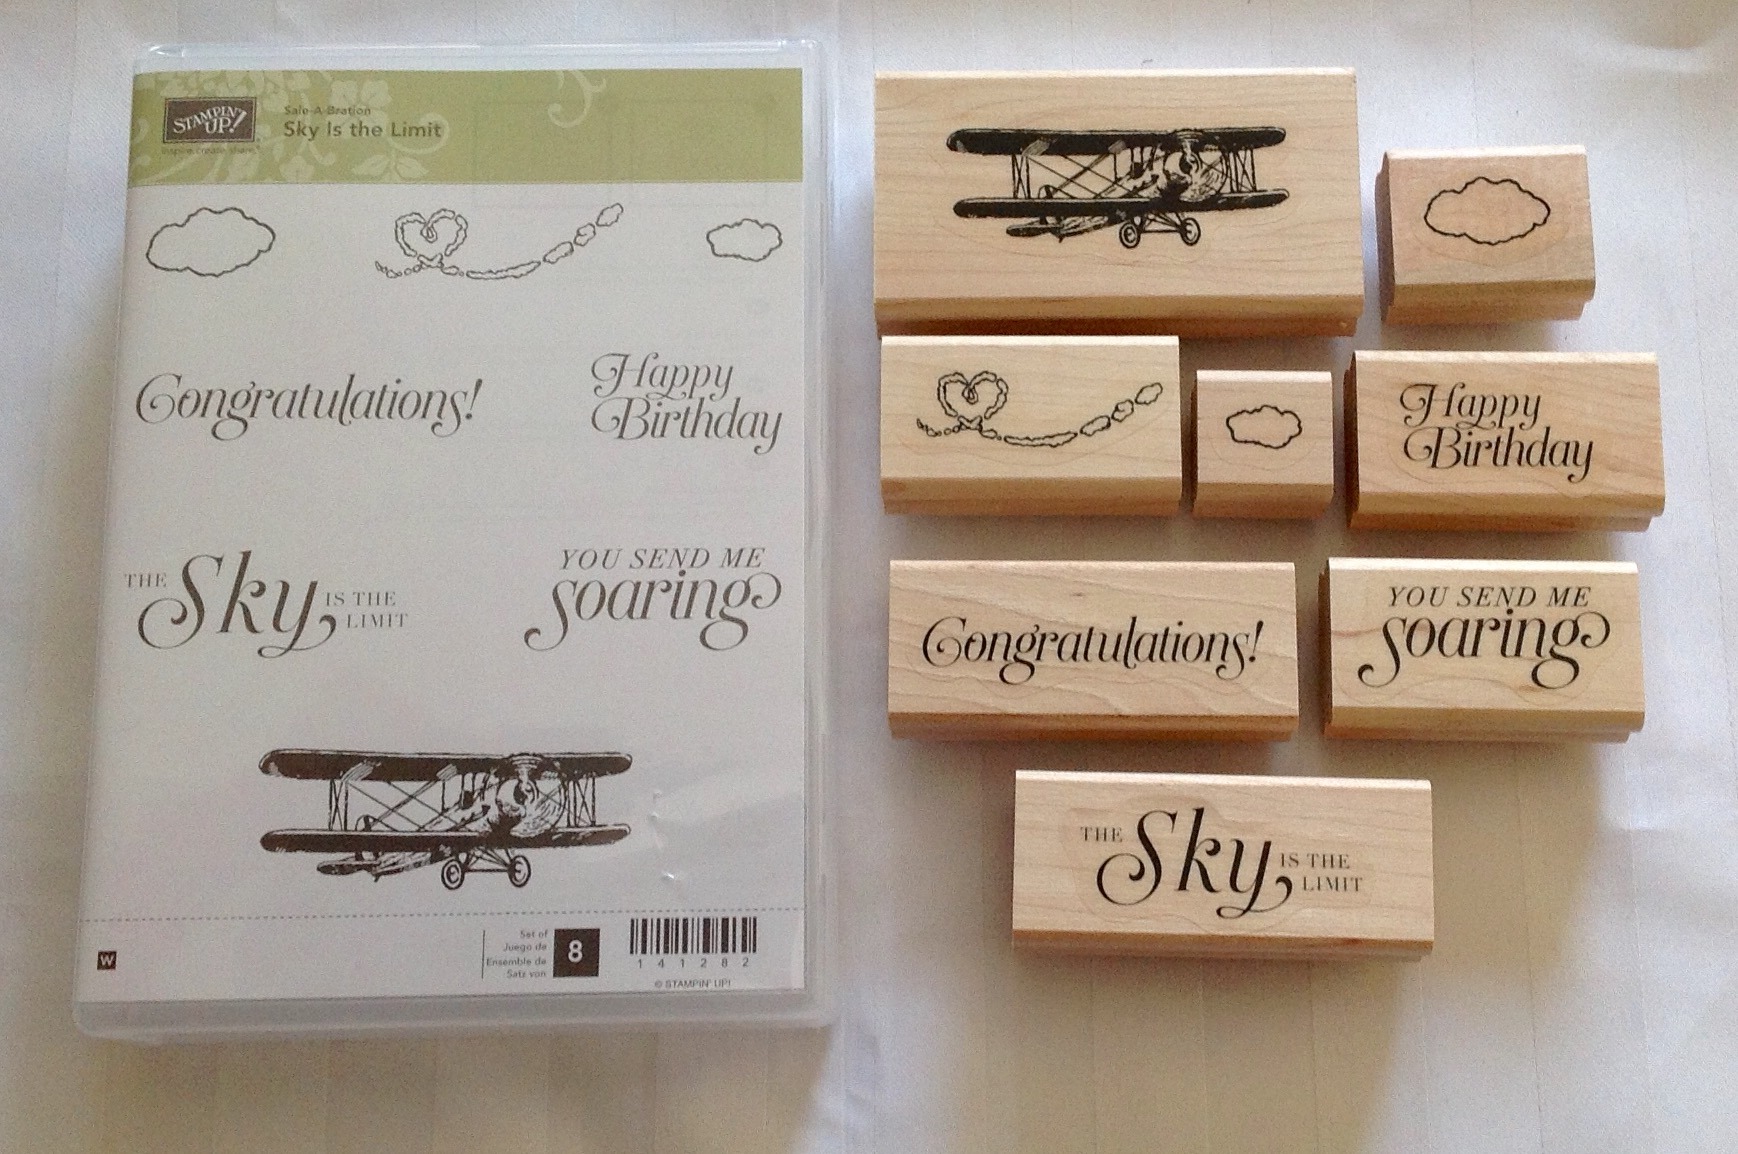 Sky is the Limit stamp set.